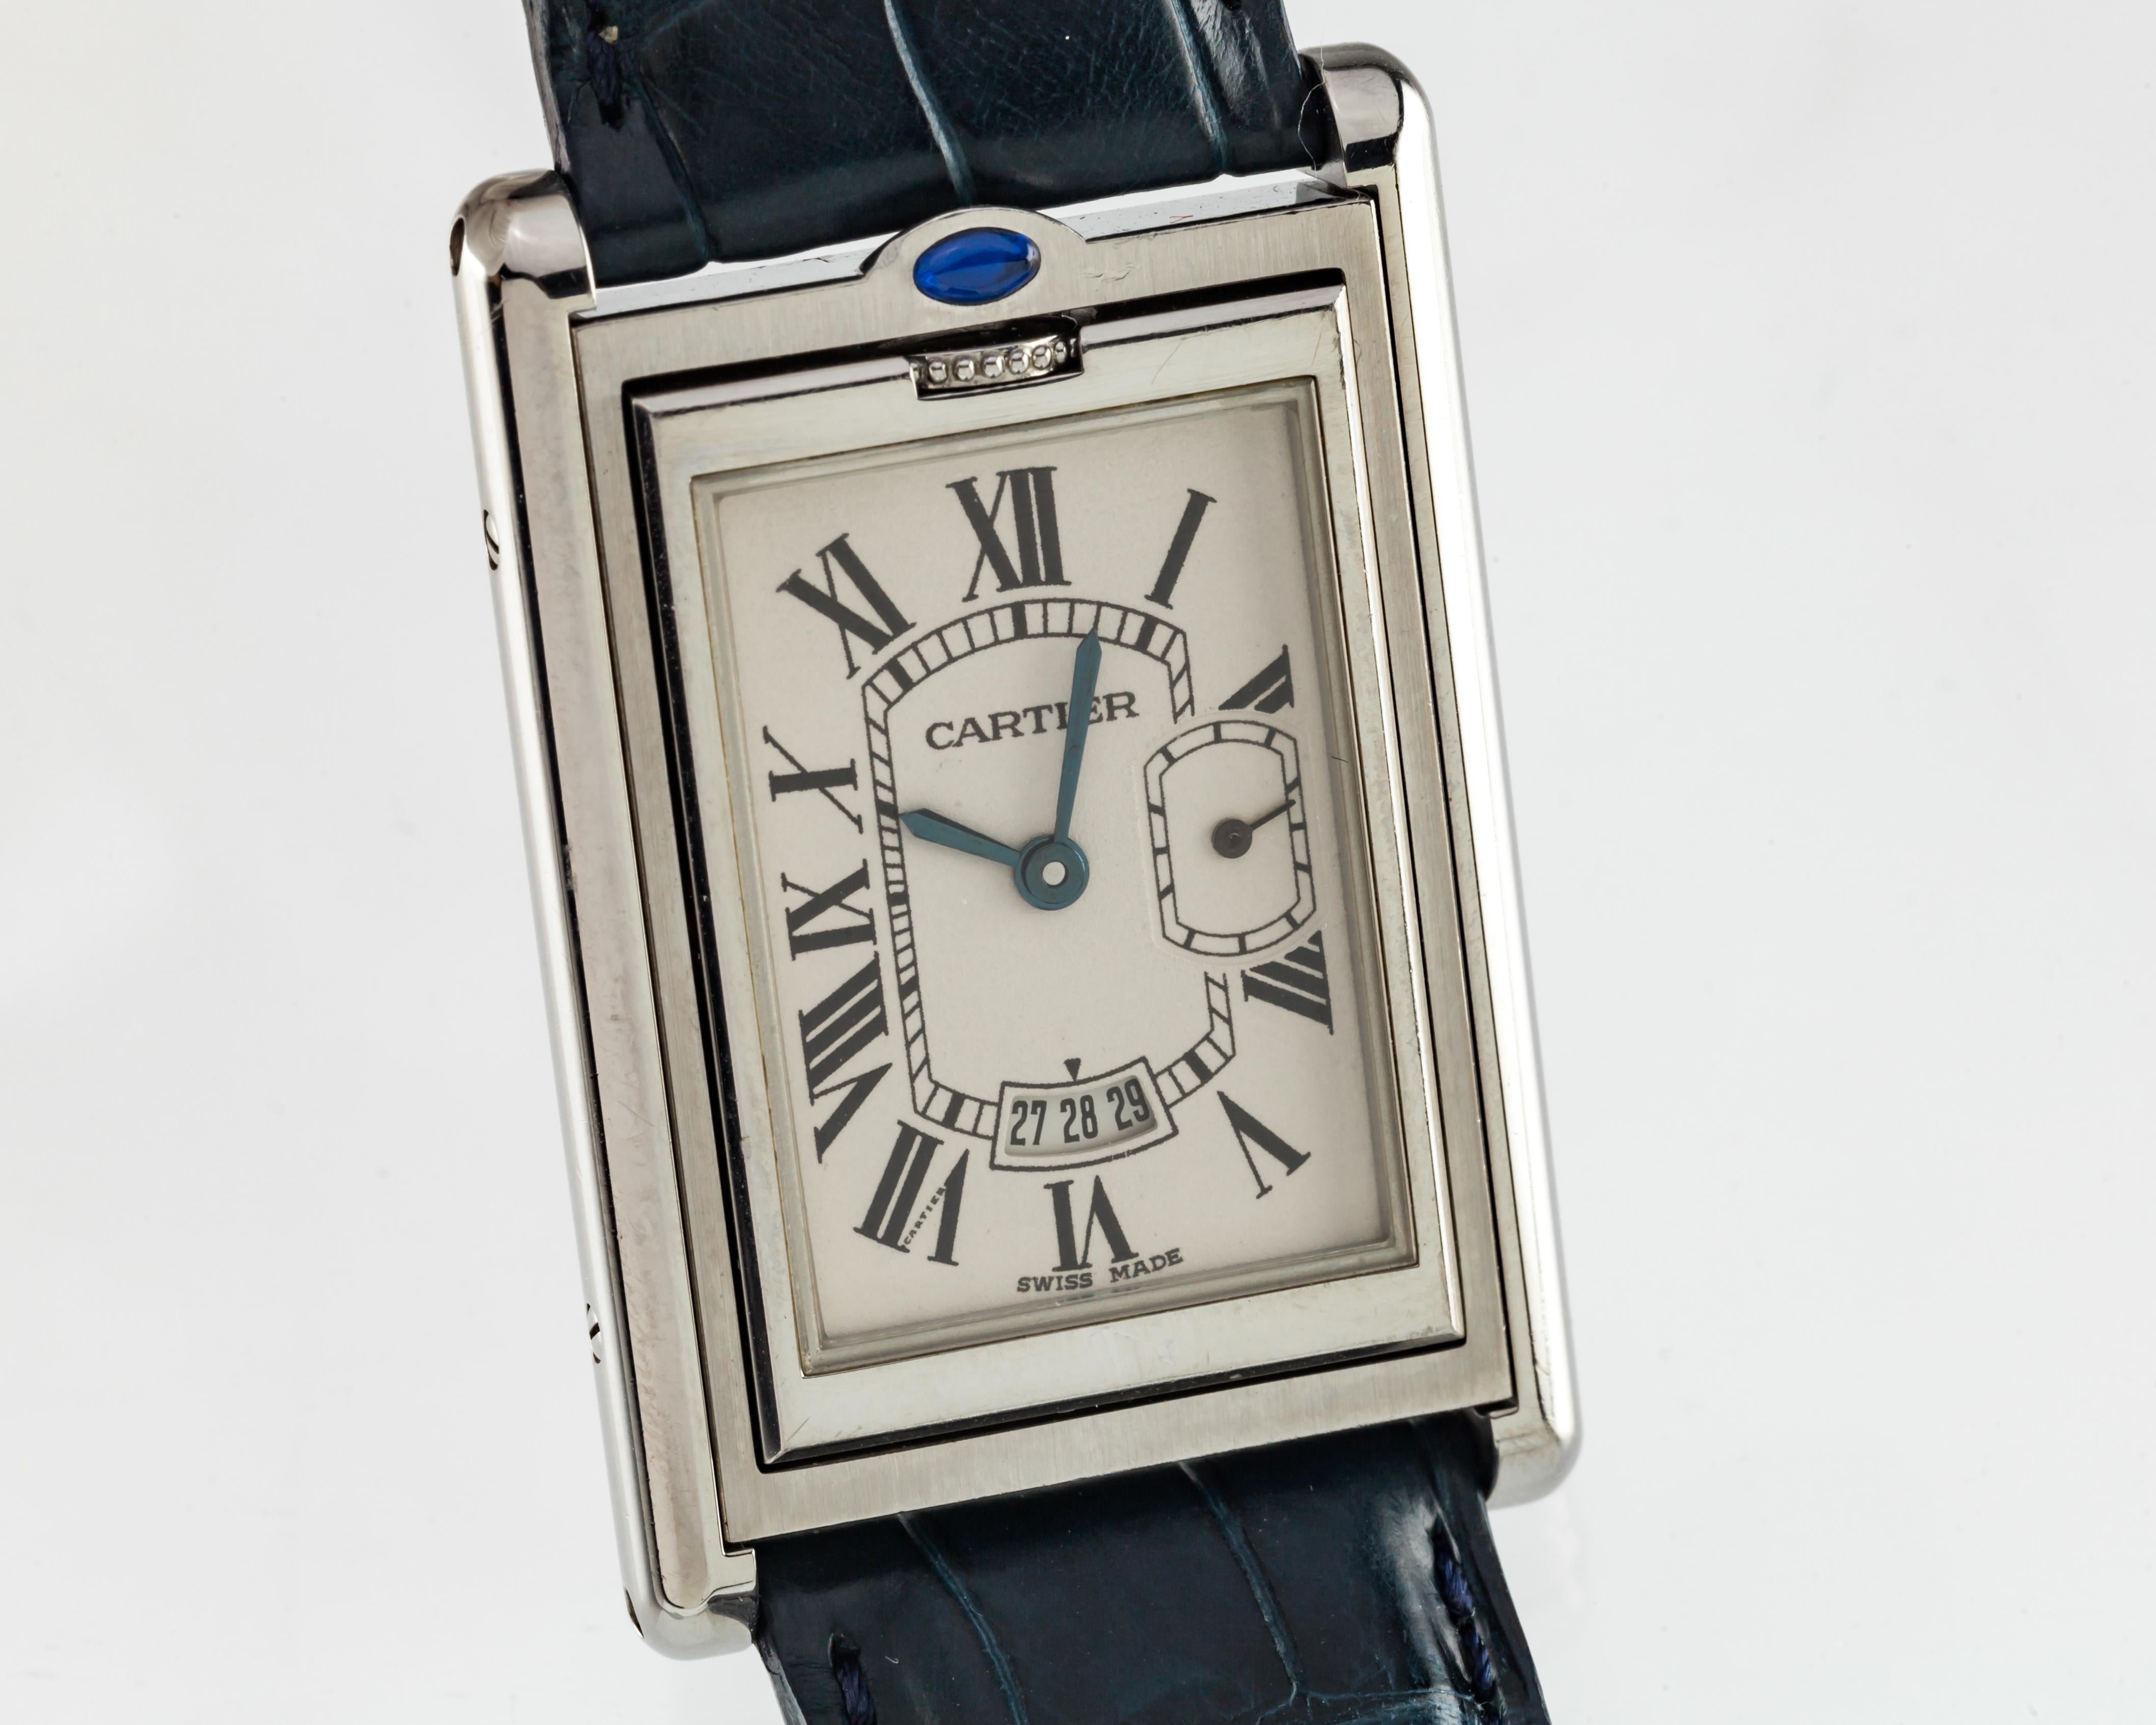 Cartier Stainless Steel Men's Reversible Basculante Quartz Watch 2522

Model: Basculante XL
Model #2522

Stainless Steel Reversible Rectangular Case
Watch can be flipped over (see photos for demonstration)
Width of Case = 26 mm
Length of Case = 33